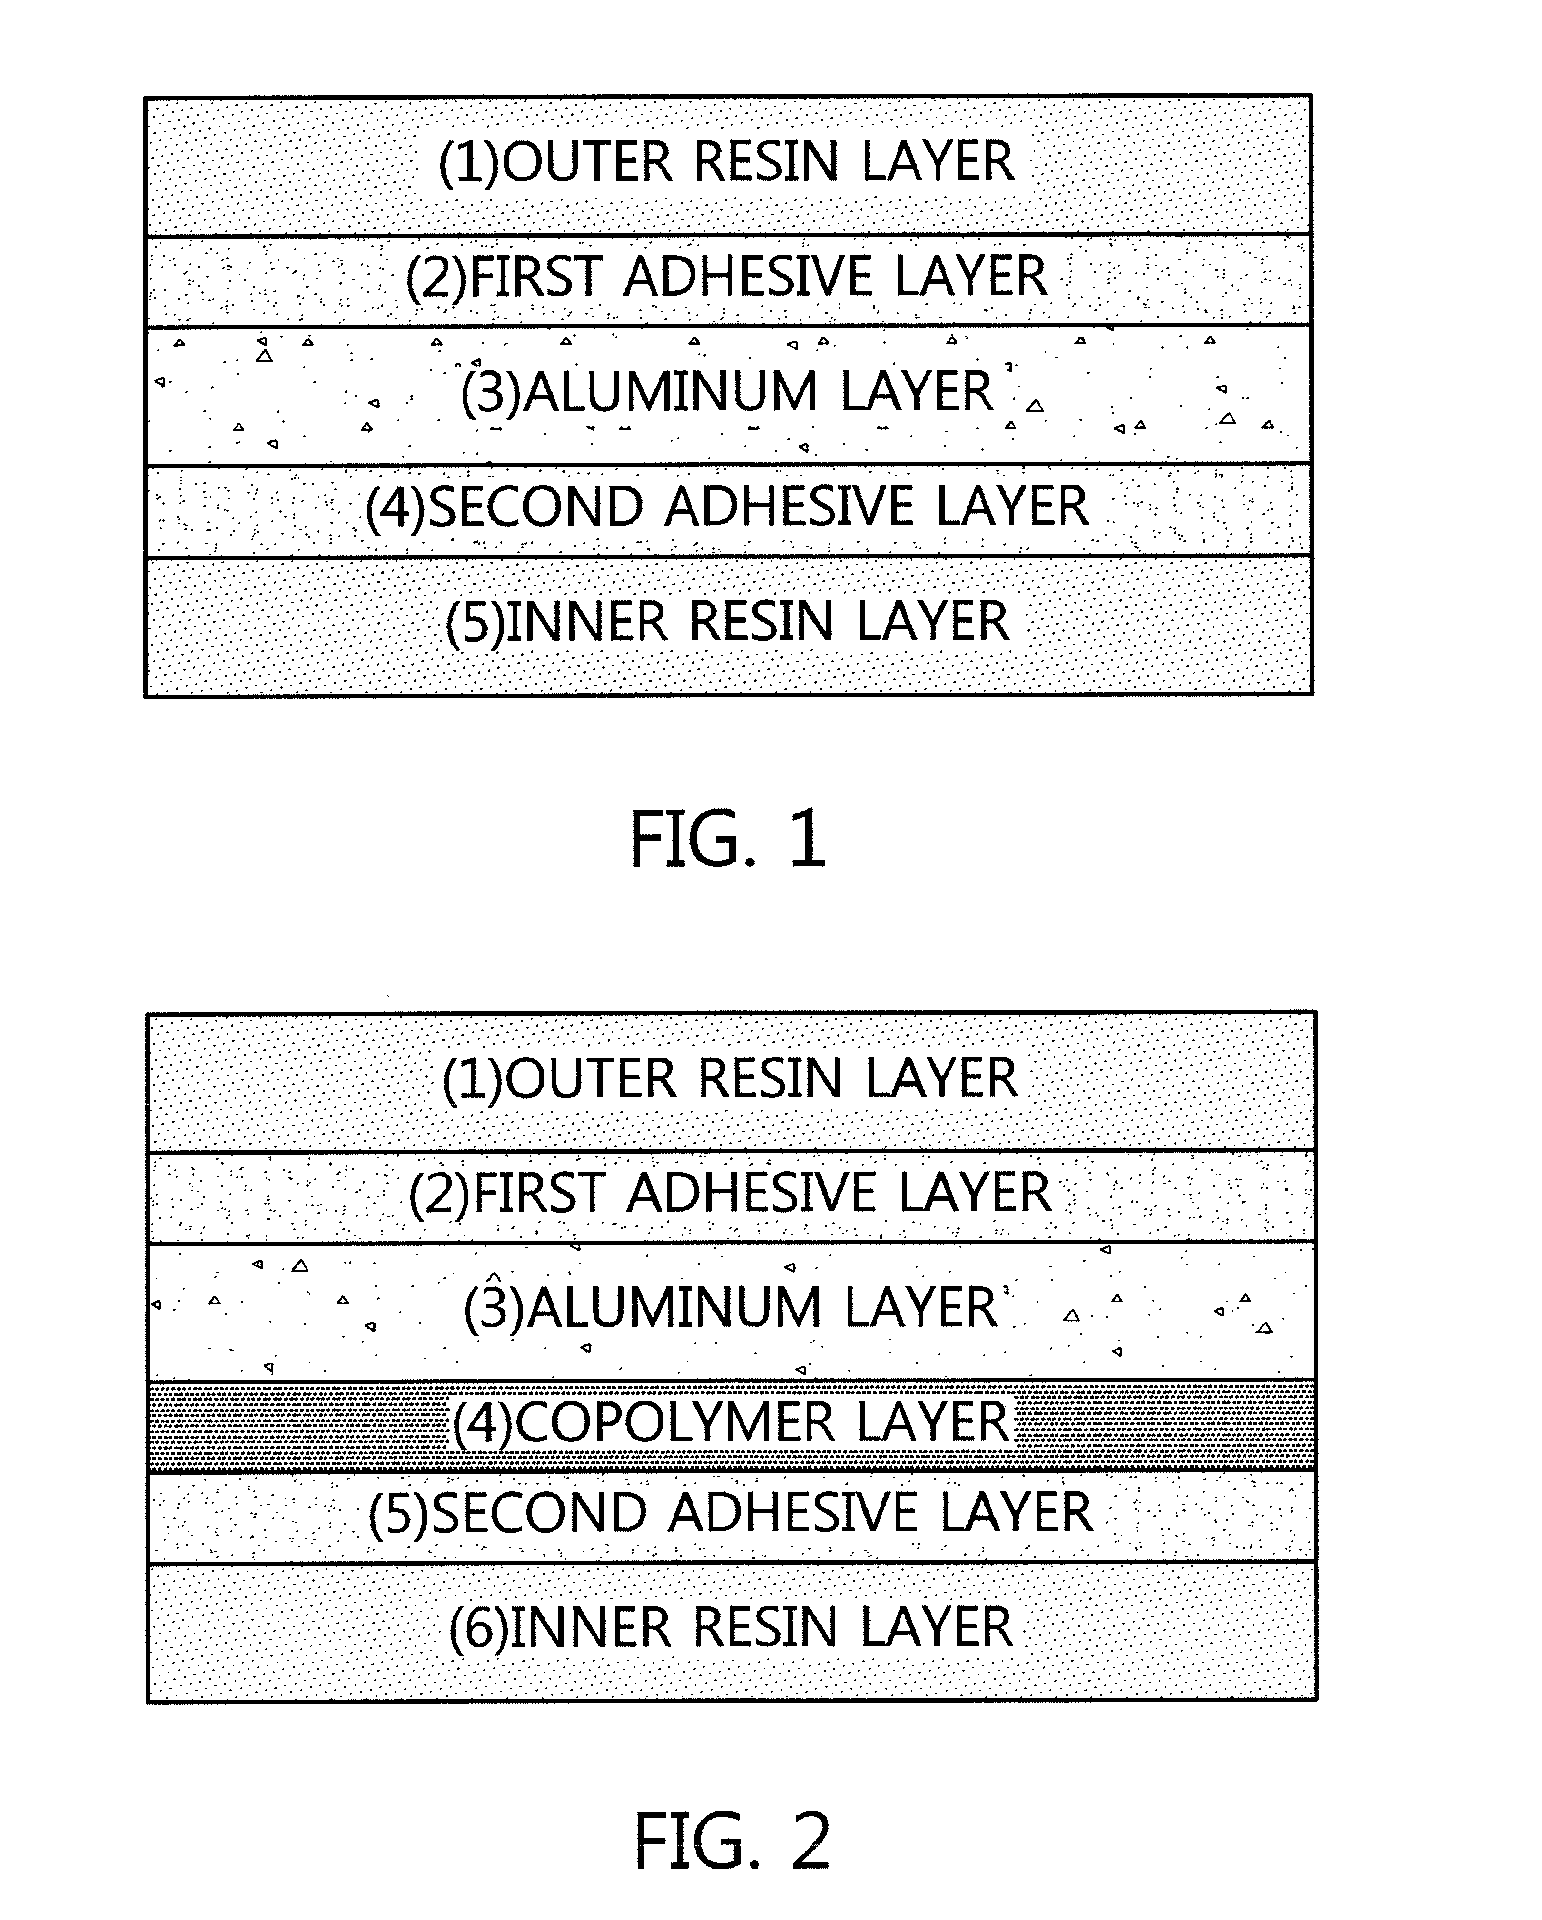 Aluminium pouch film for secondary battery, packaging material comprising same, secondary battery comprising same, and manufacturing method therefor